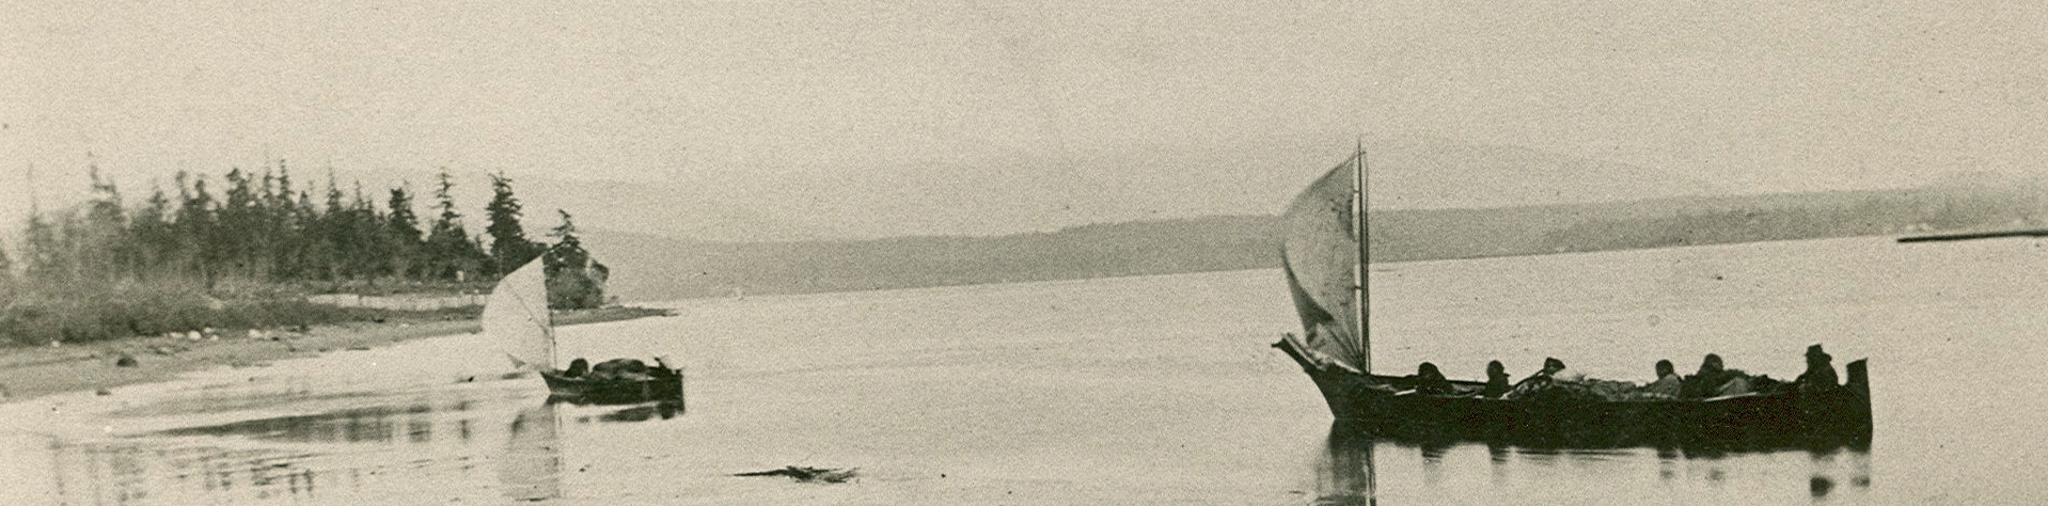 A historical photograph of sailing canoes in Fidalgo Bay.